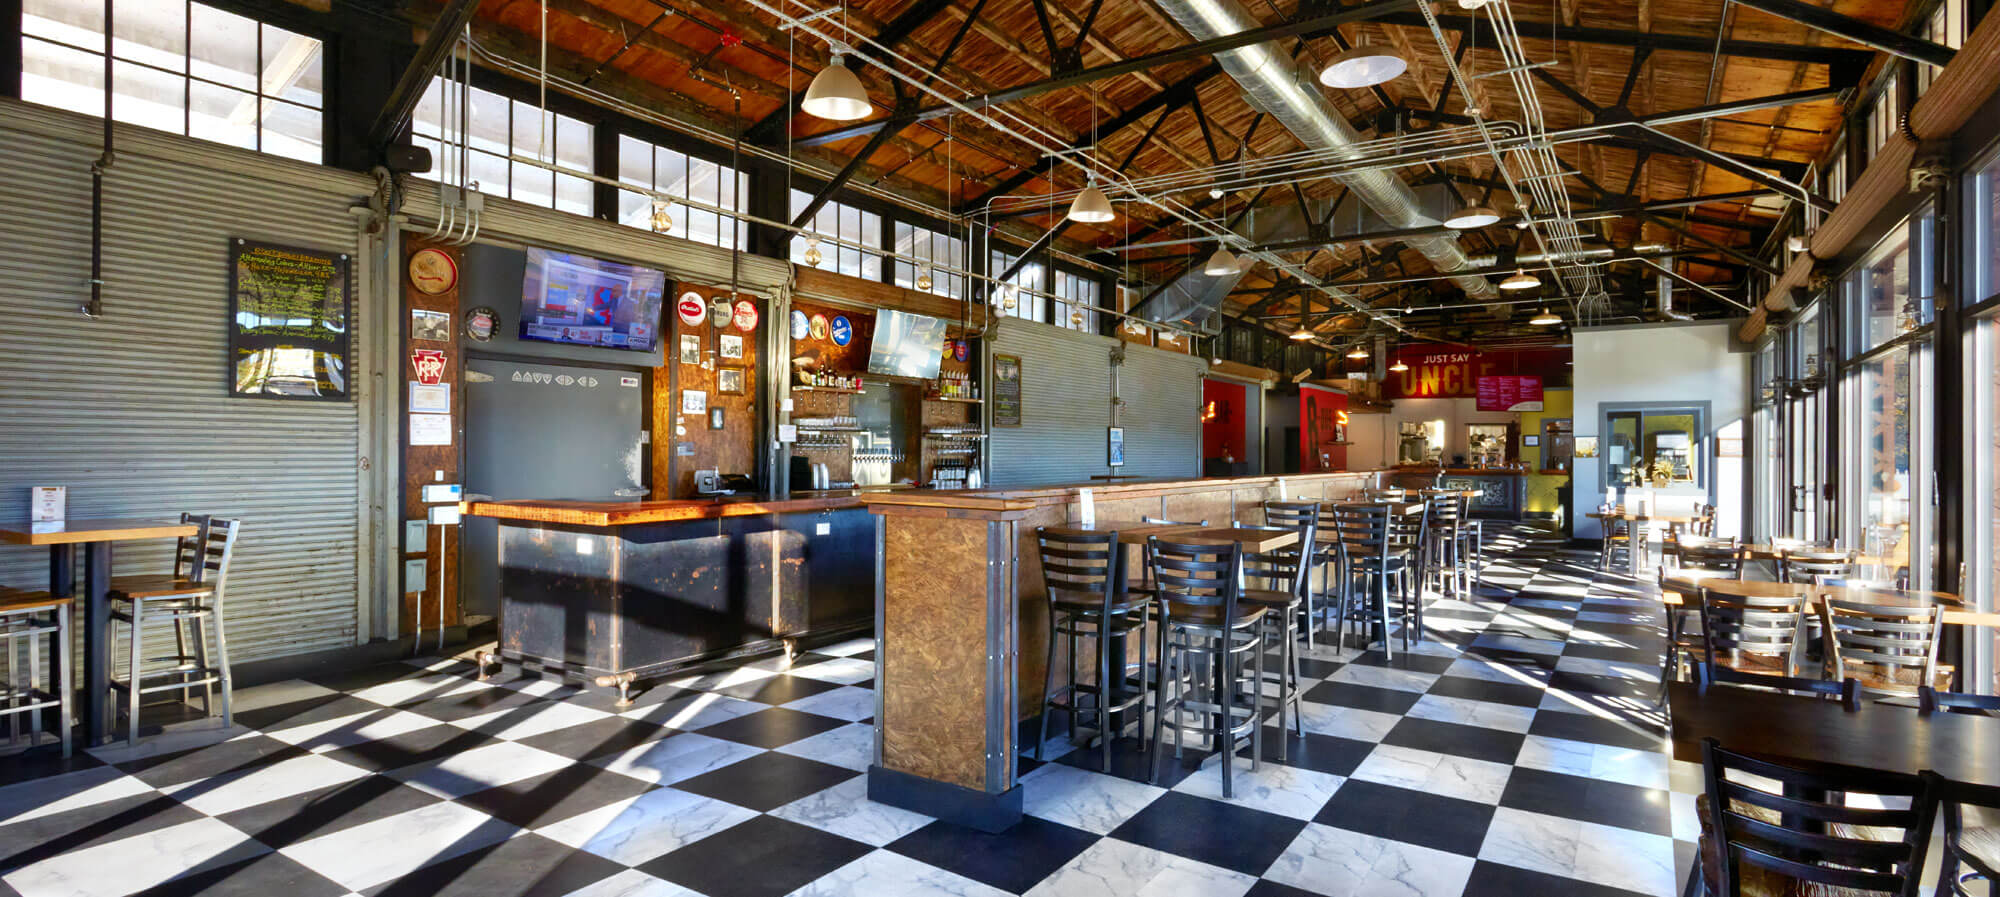 Chester County Restaurant and Bar Architectural Design and Planning